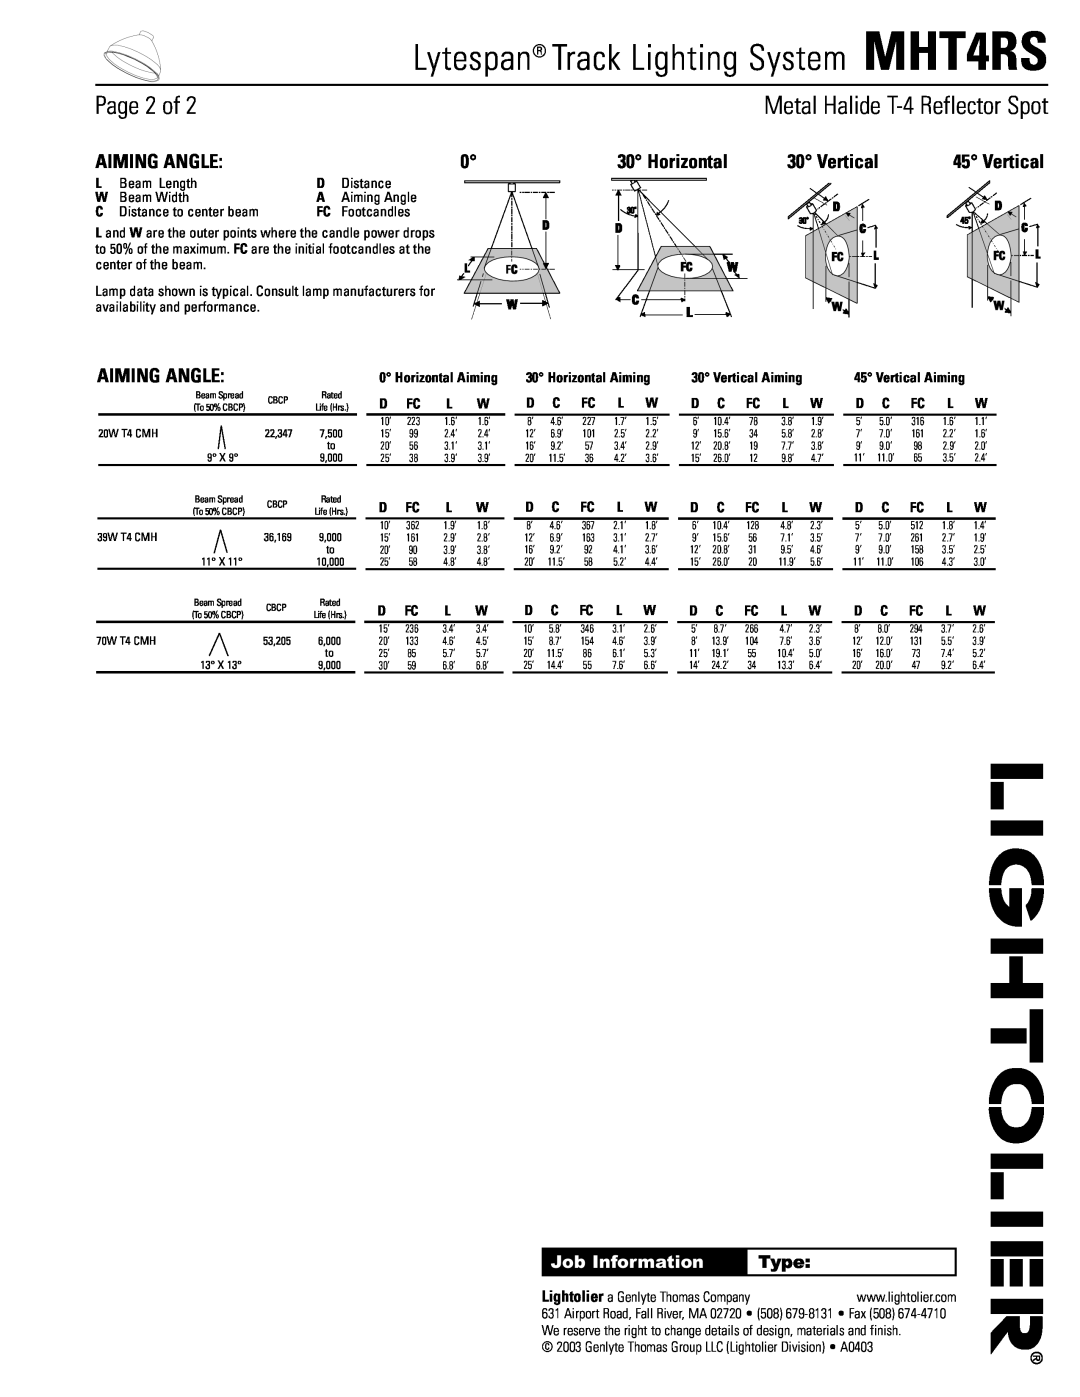 Lightolier MHT4RS Metal Halide T-4Reflector Spot, Aiming Angle, Horizontal, Vertical, Page 2 of, Job Information, Type 